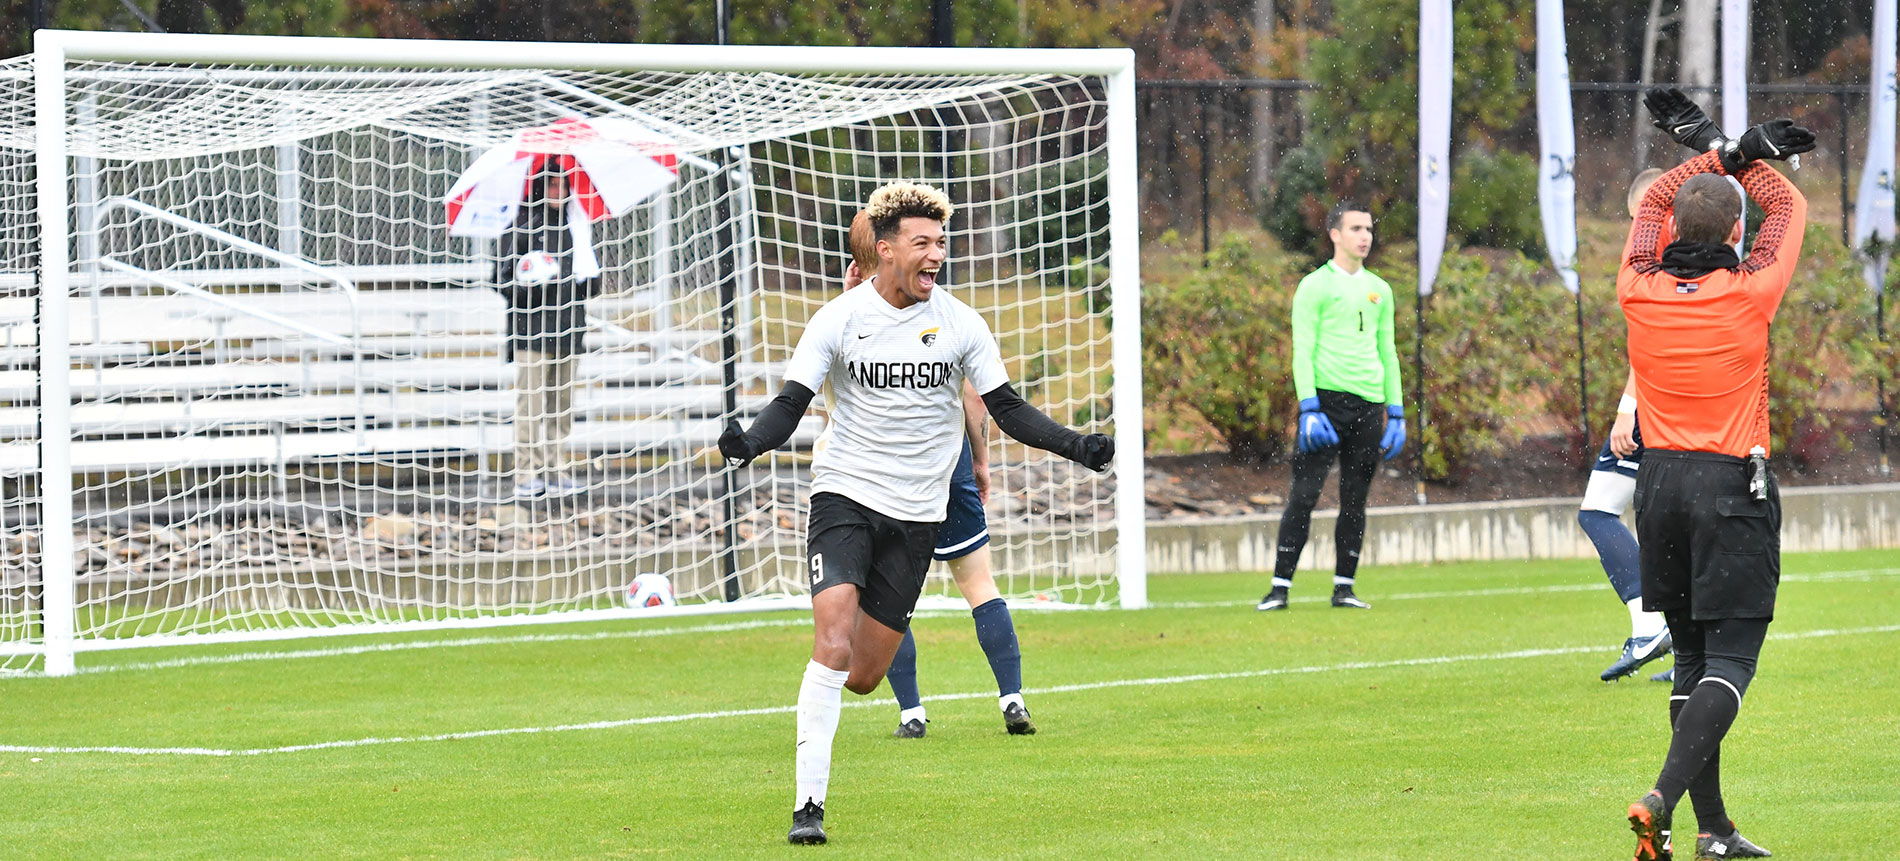 Men’s Soccer Advances to SAC Championship Finals with 2-1 Win over Coker